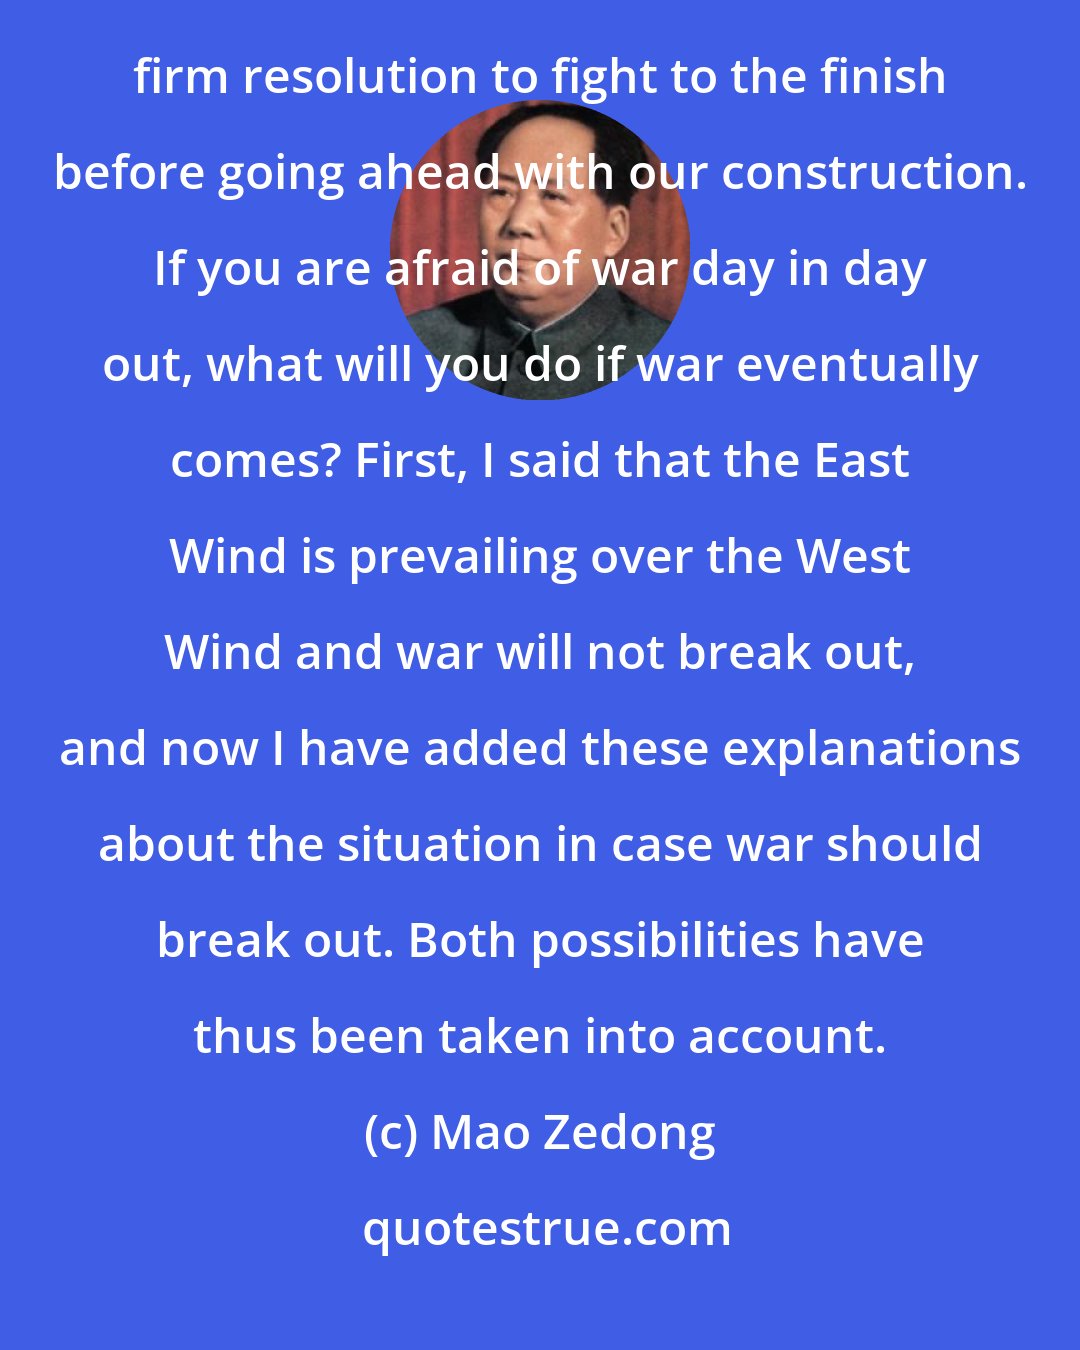 Mao Zedong: We desire peace. However, if imperialism insists on fighting a war, we will have no alternative but to take the firm resolution to fight to the finish before going ahead with our construction. If you are afraid of war day in day out, what will you do if war eventually comes? First, I said that the East Wind is prevailing over the West Wind and war will not break out, and now I have added these explanations about the situation in case war should break out. Both possibilities have thus been taken into account.